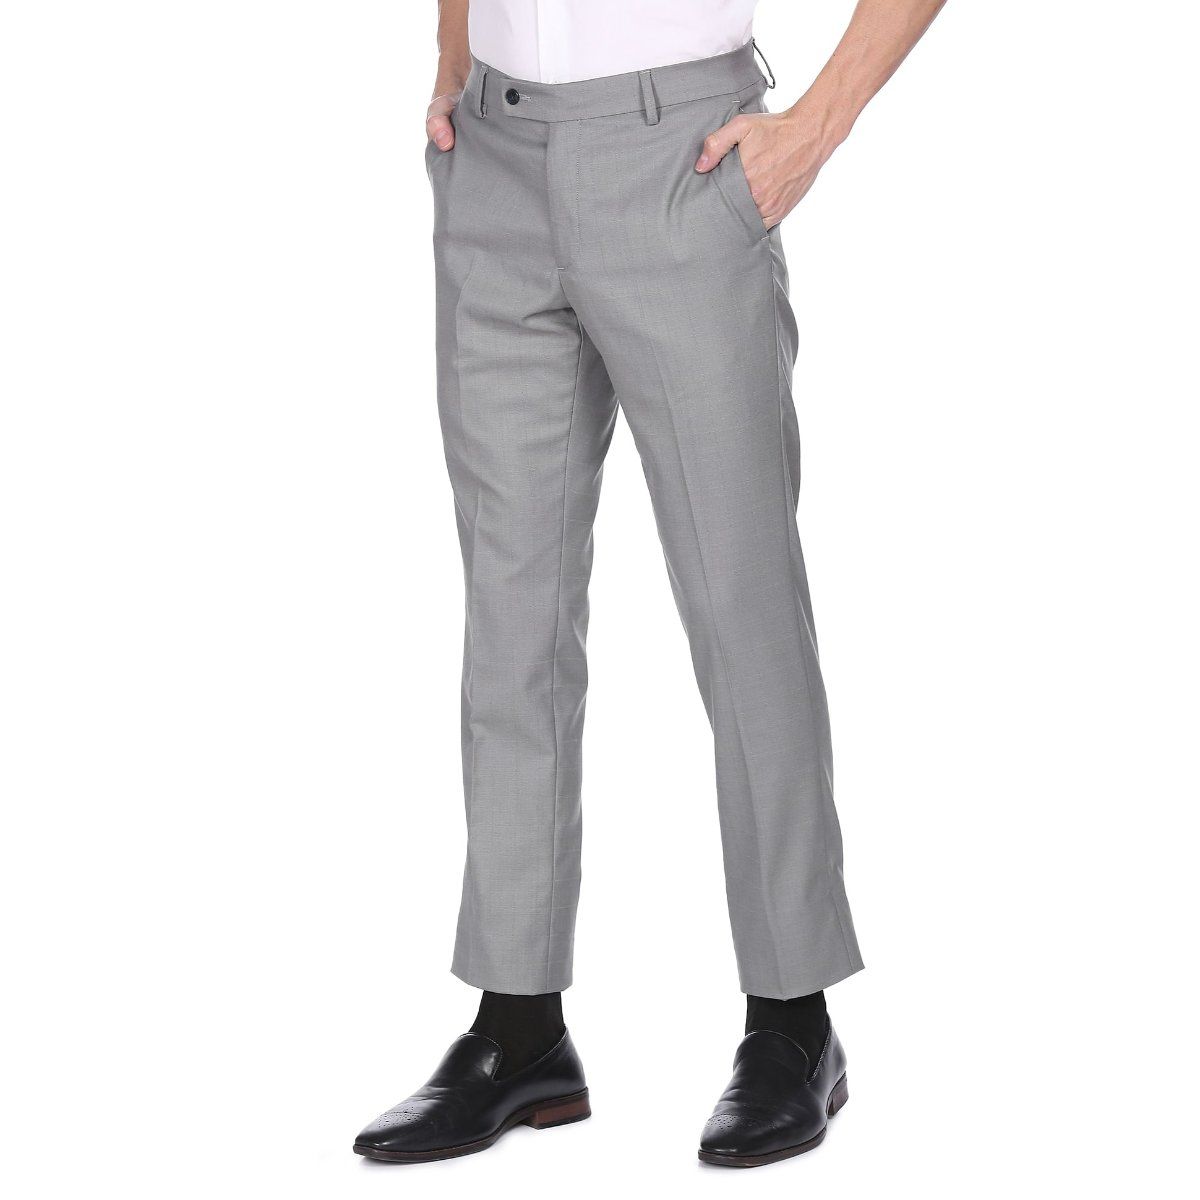 Buy ASHTAG | Checks Formal Trousers | Cotton | Formal Chinos | Grey | XS at  Amazon.in